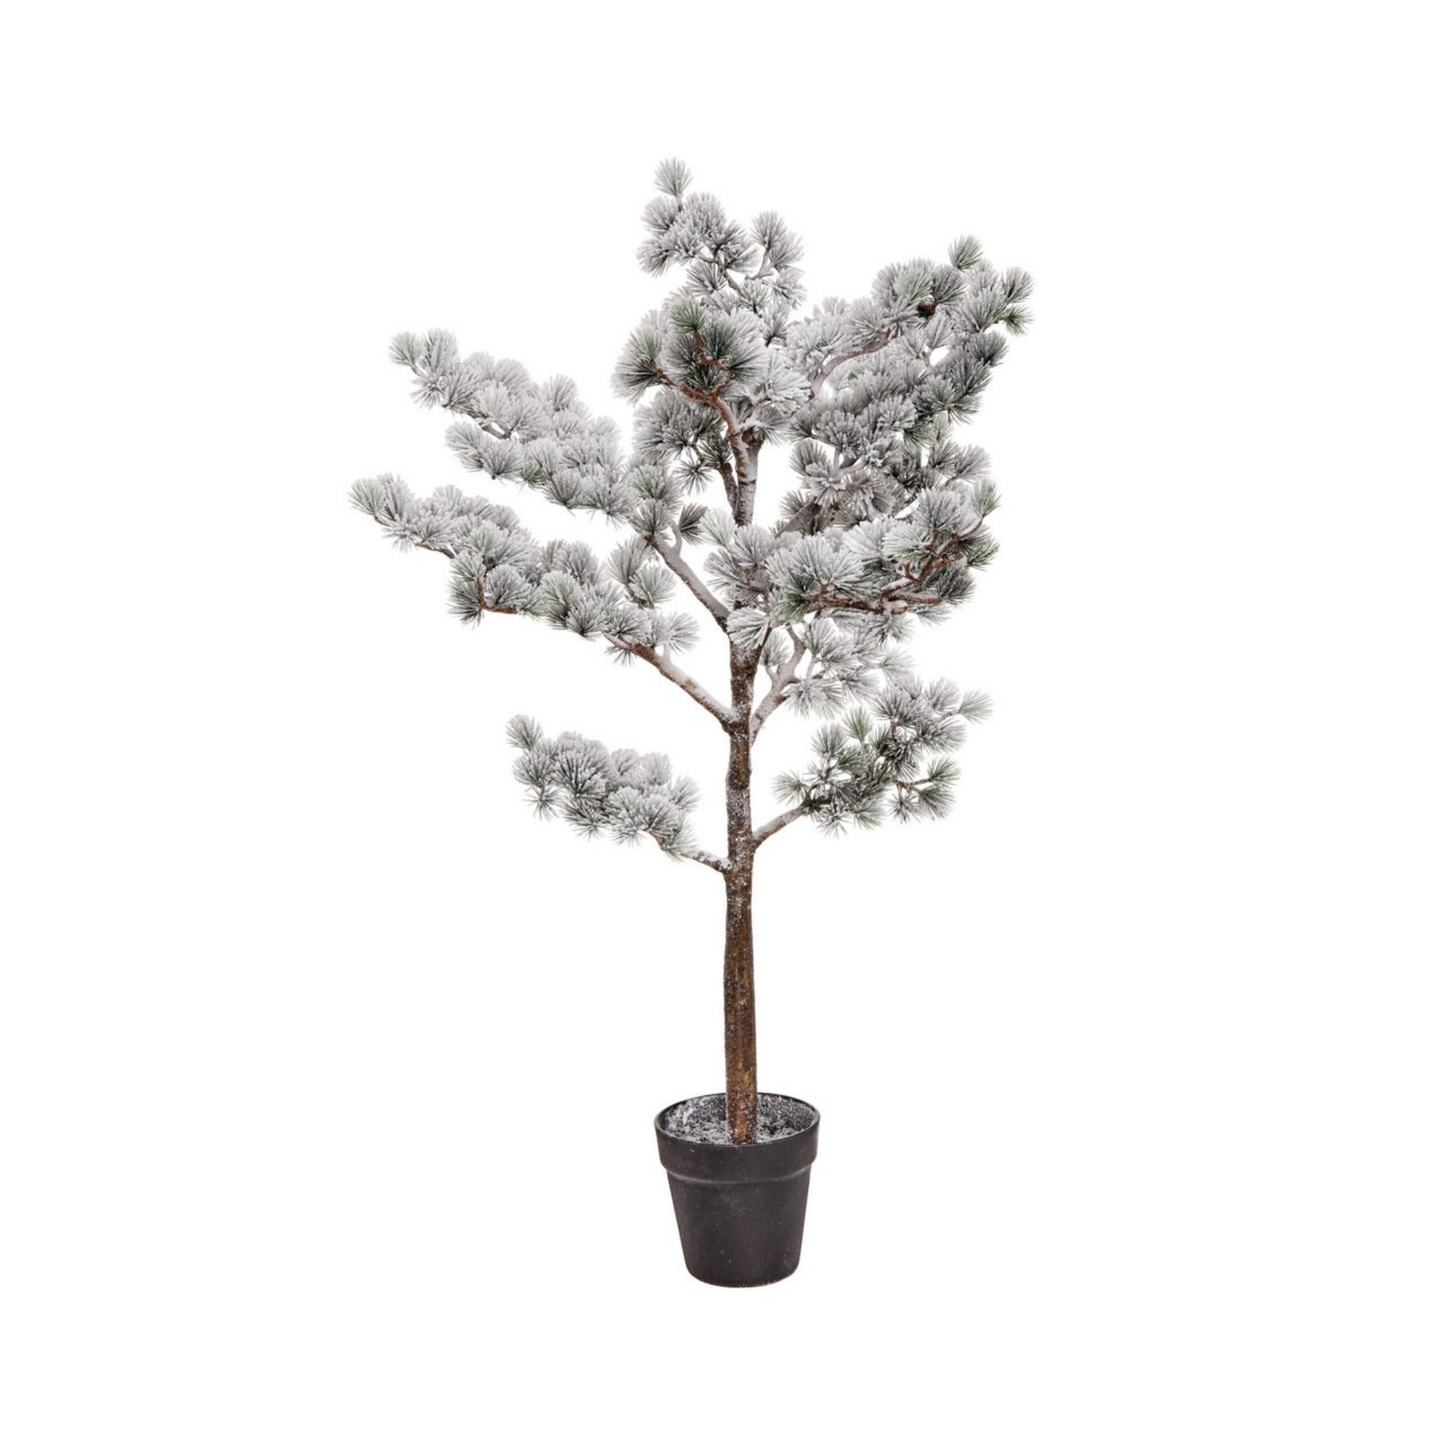 36" Potted Snow Mountain Pine Tree